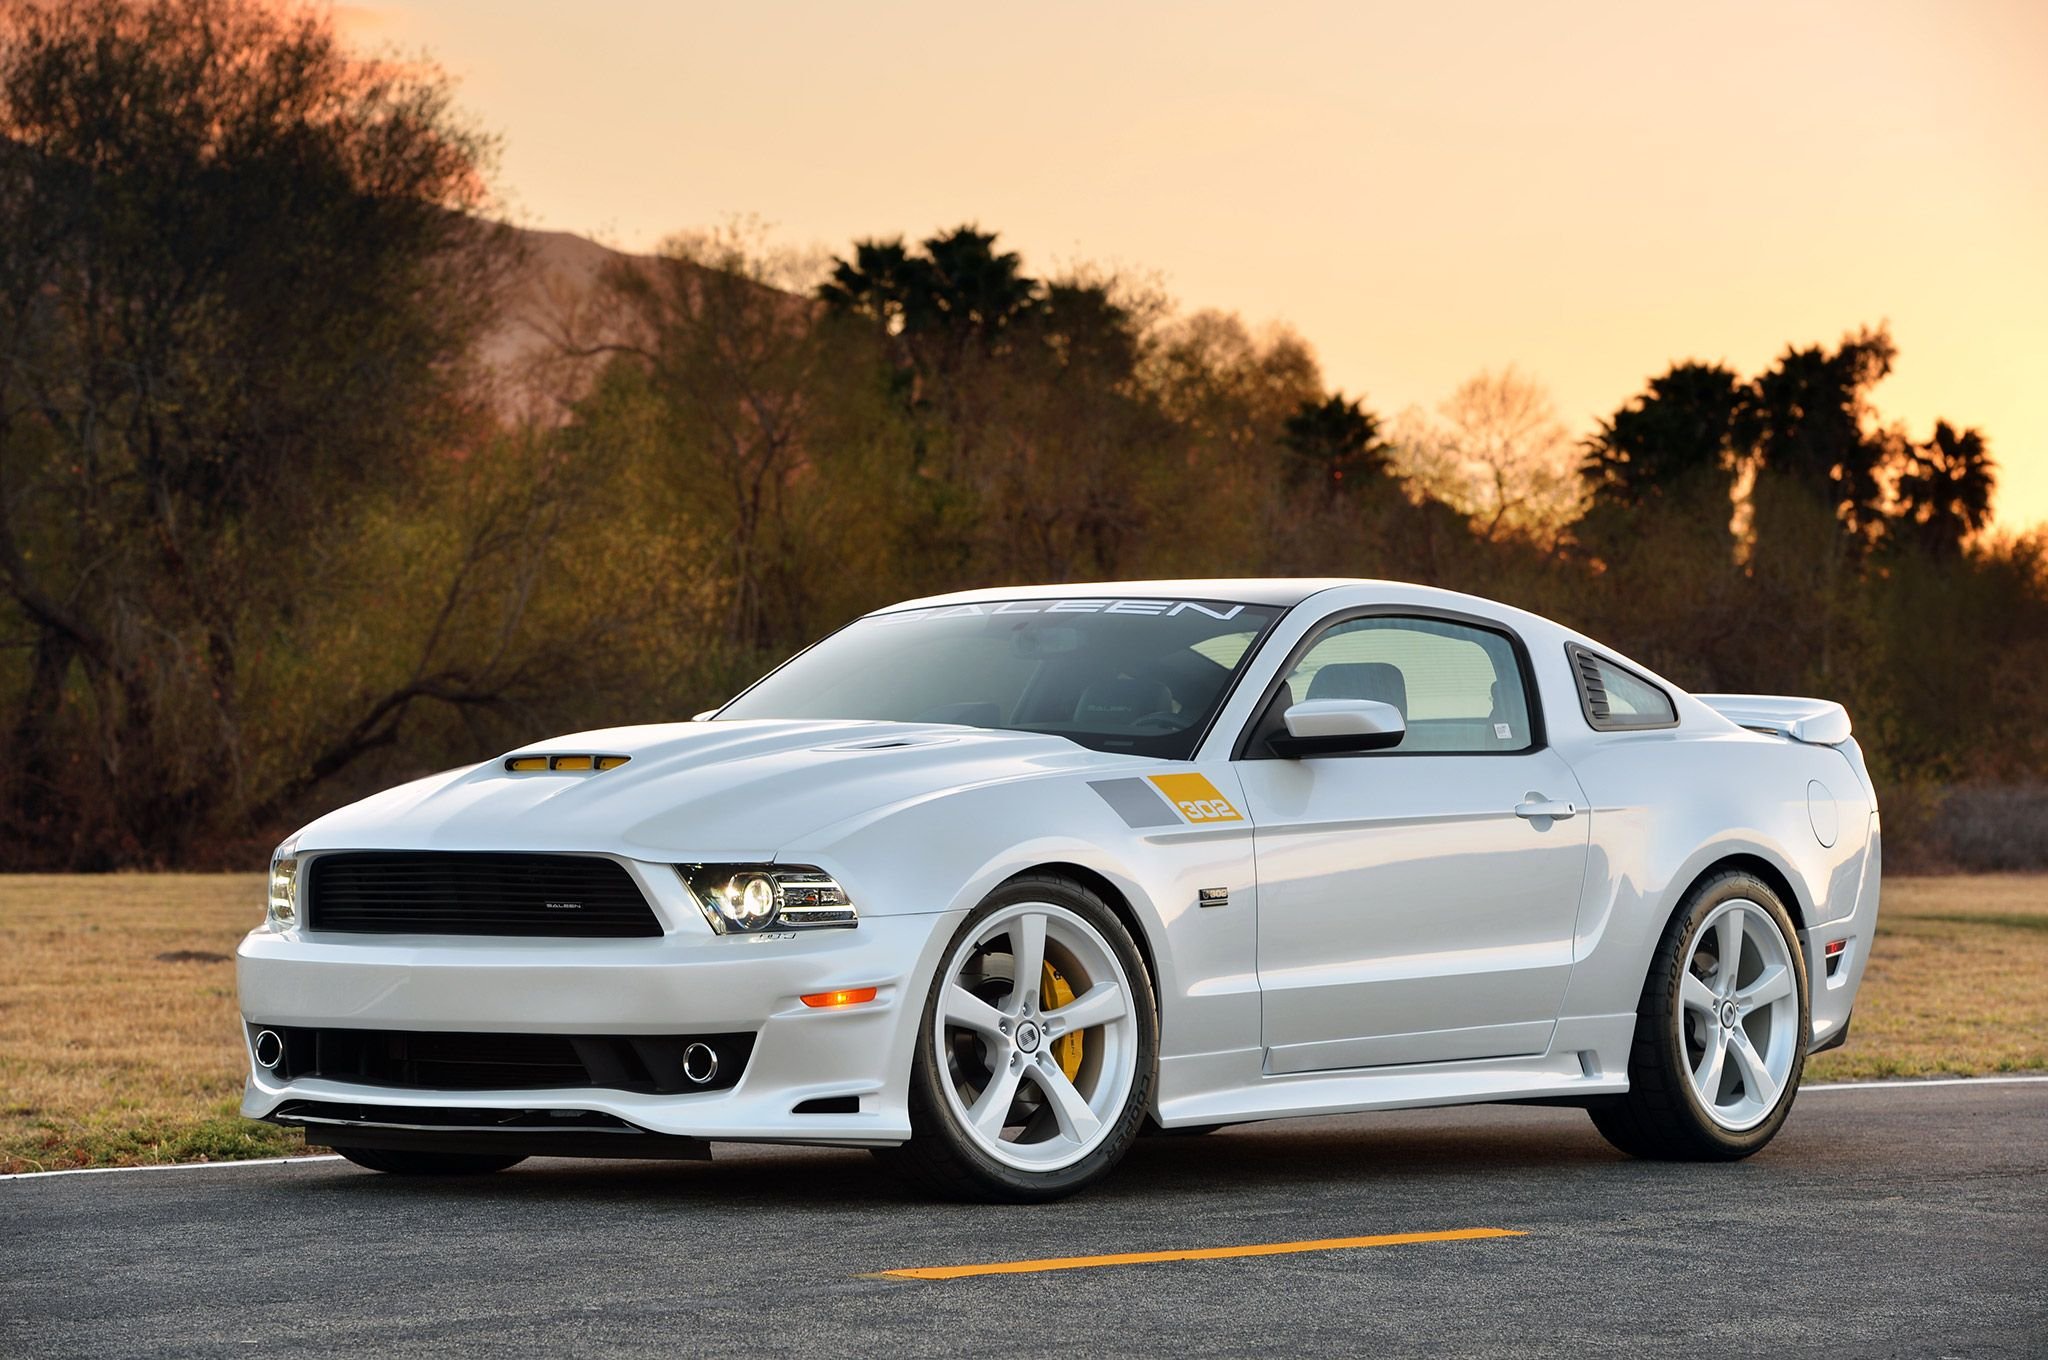 2014, Ford, Mustang, Saleen, Sa3, 02muscle, Super, Street